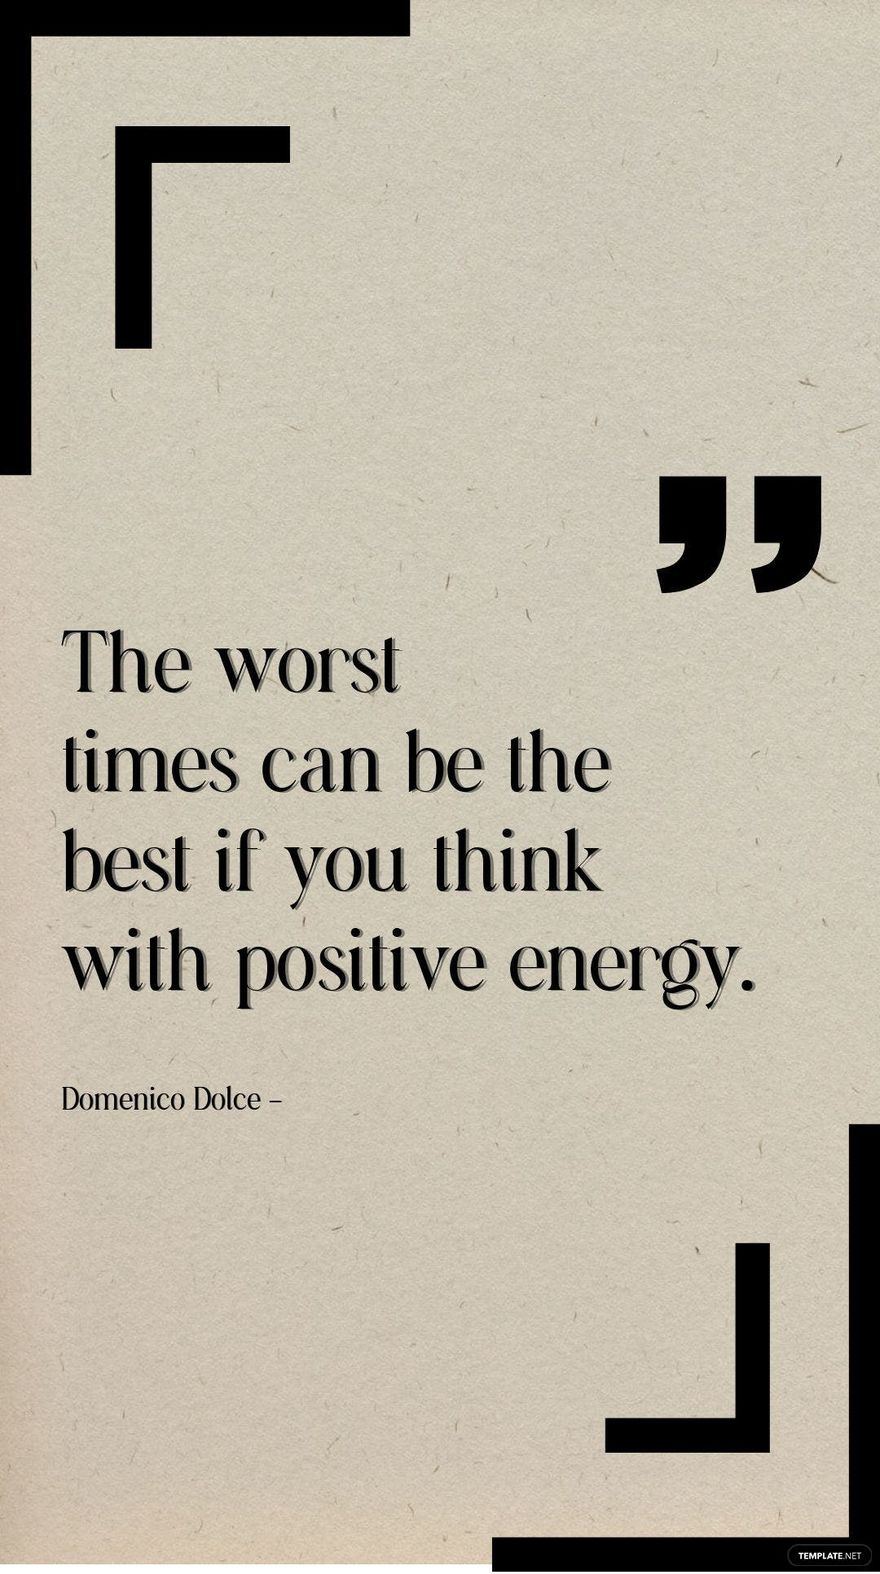 Domenico Dolce - The worst times can be the best if you think with positive energy.